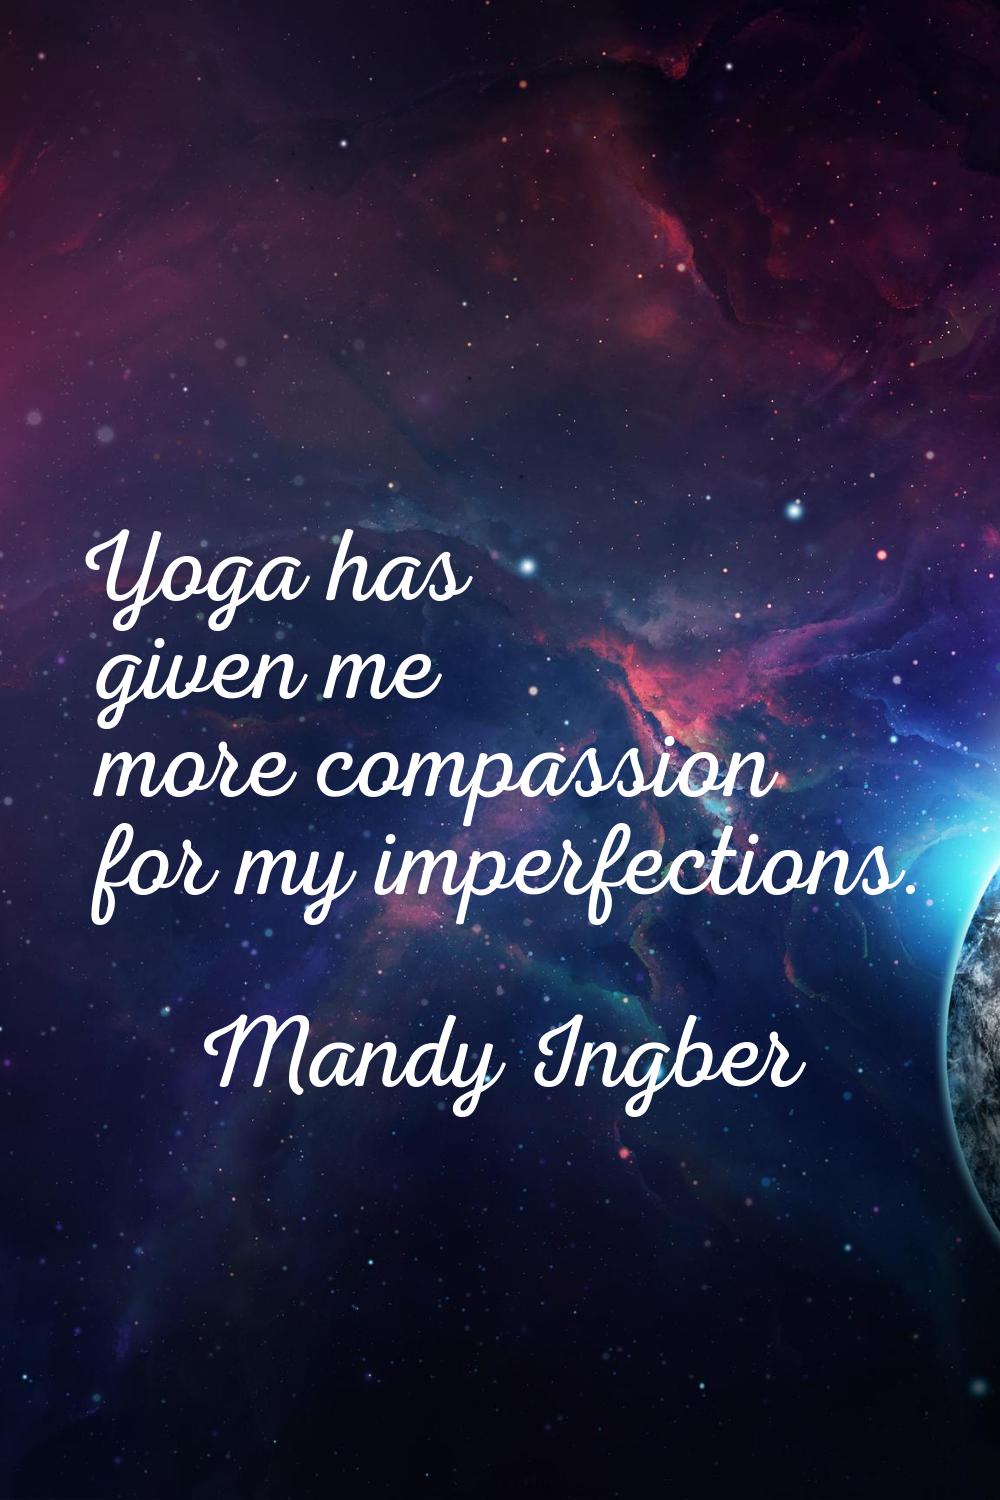 Yoga has given me more compassion for my imperfections.